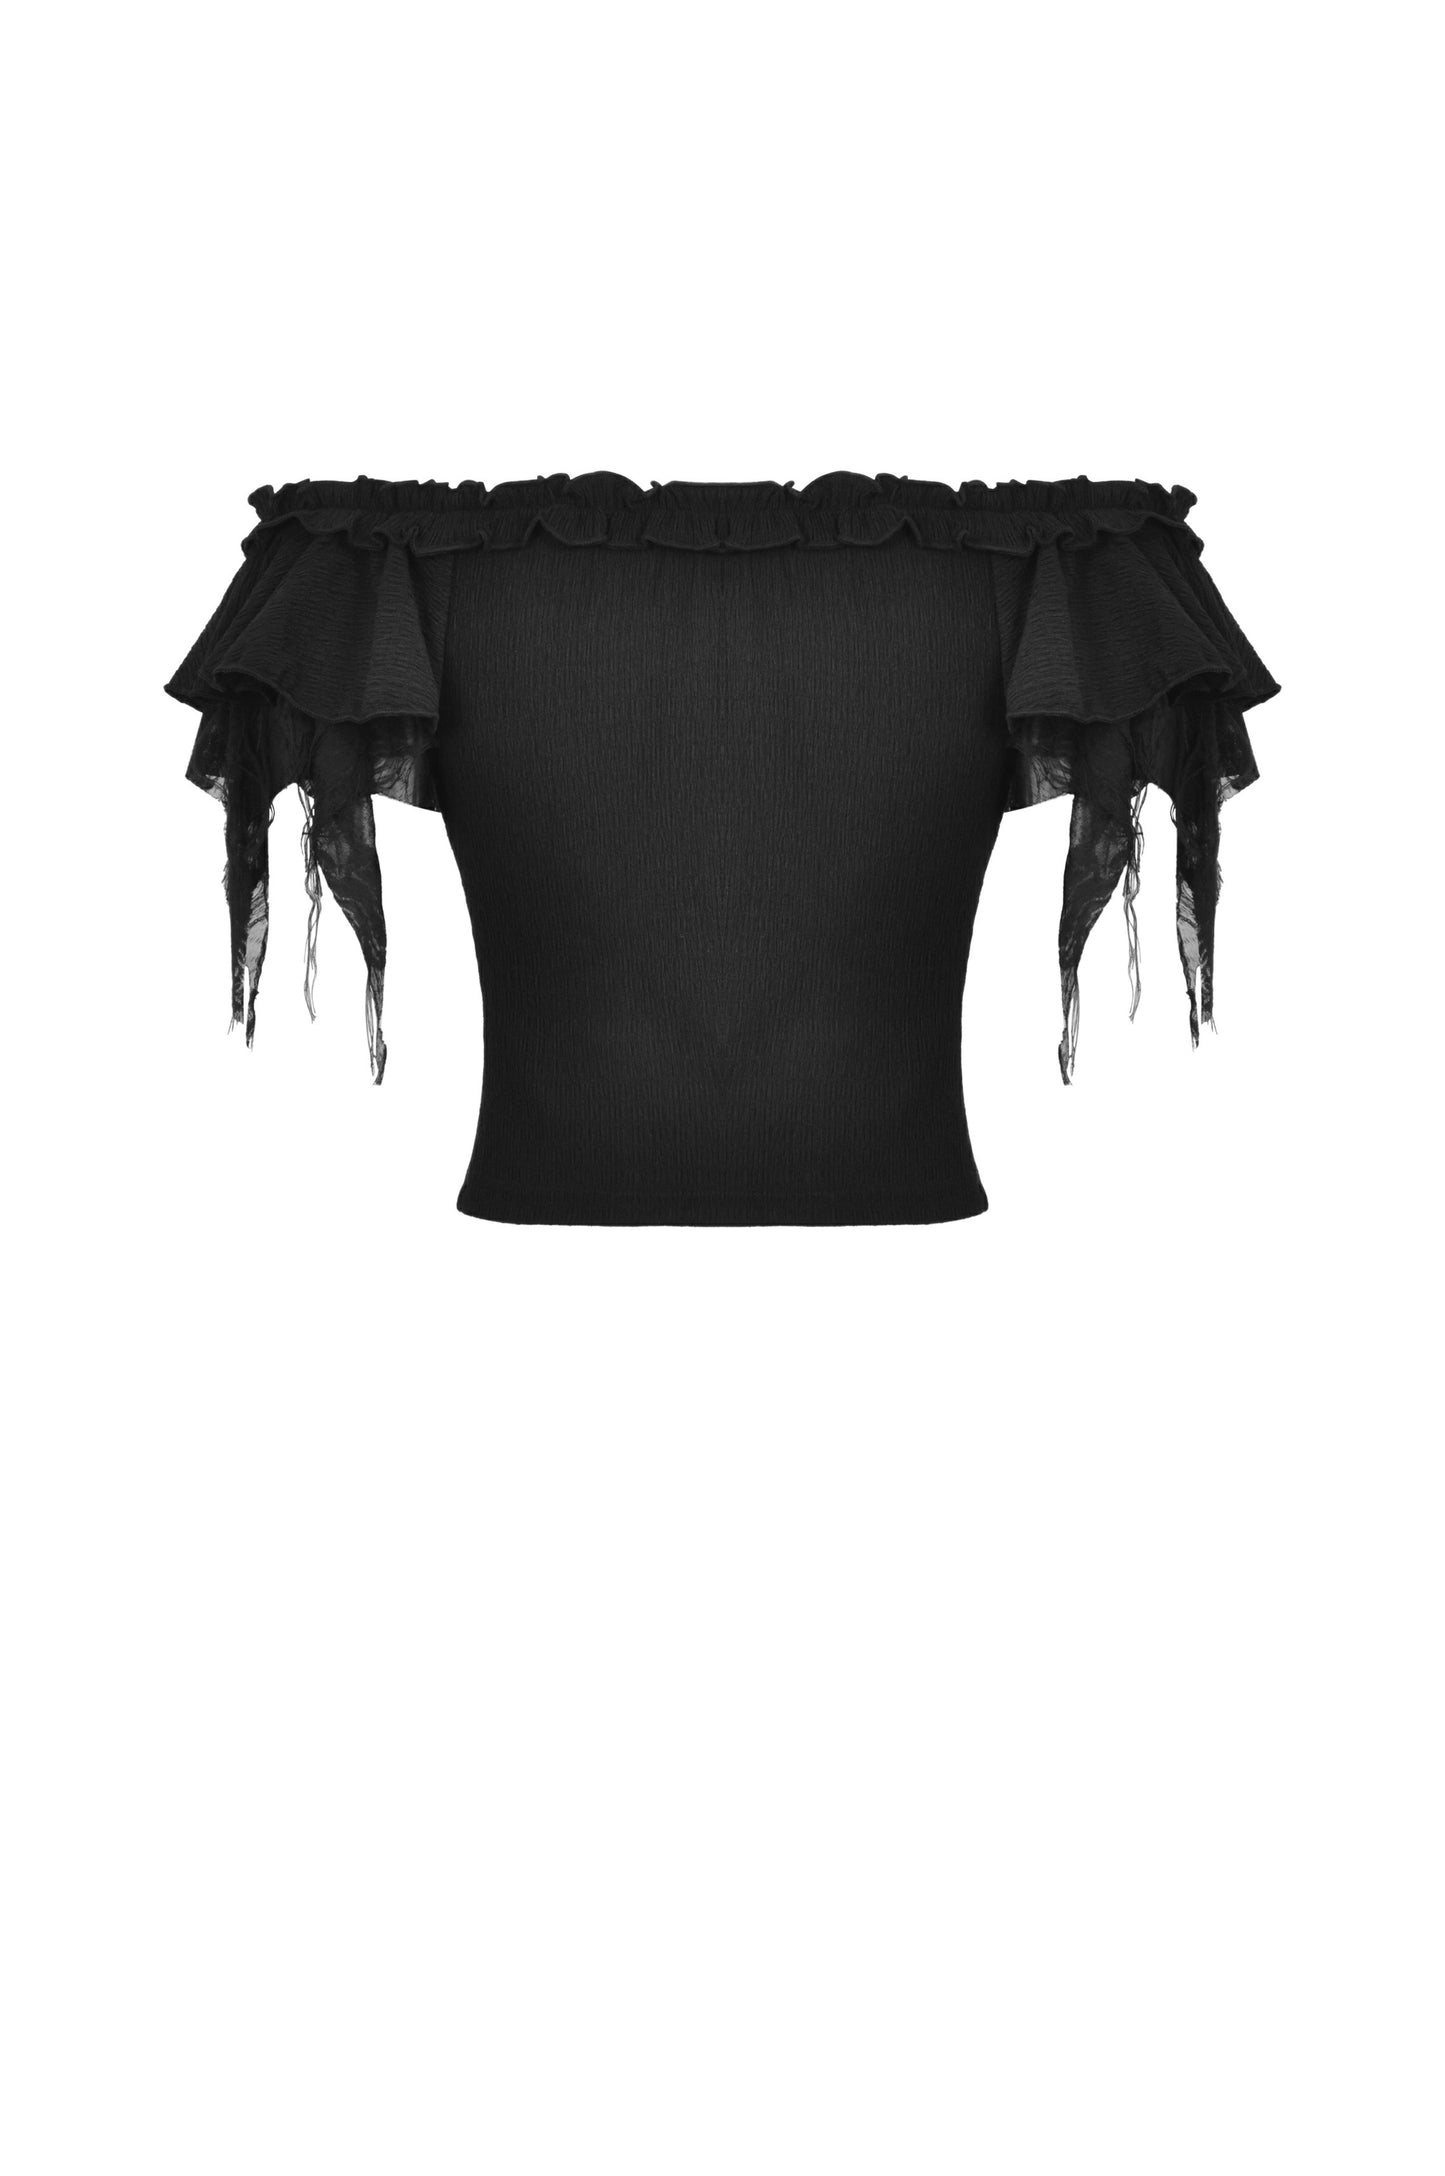 Ladylike Gothic Off The Shoulder Top by Dark In Love